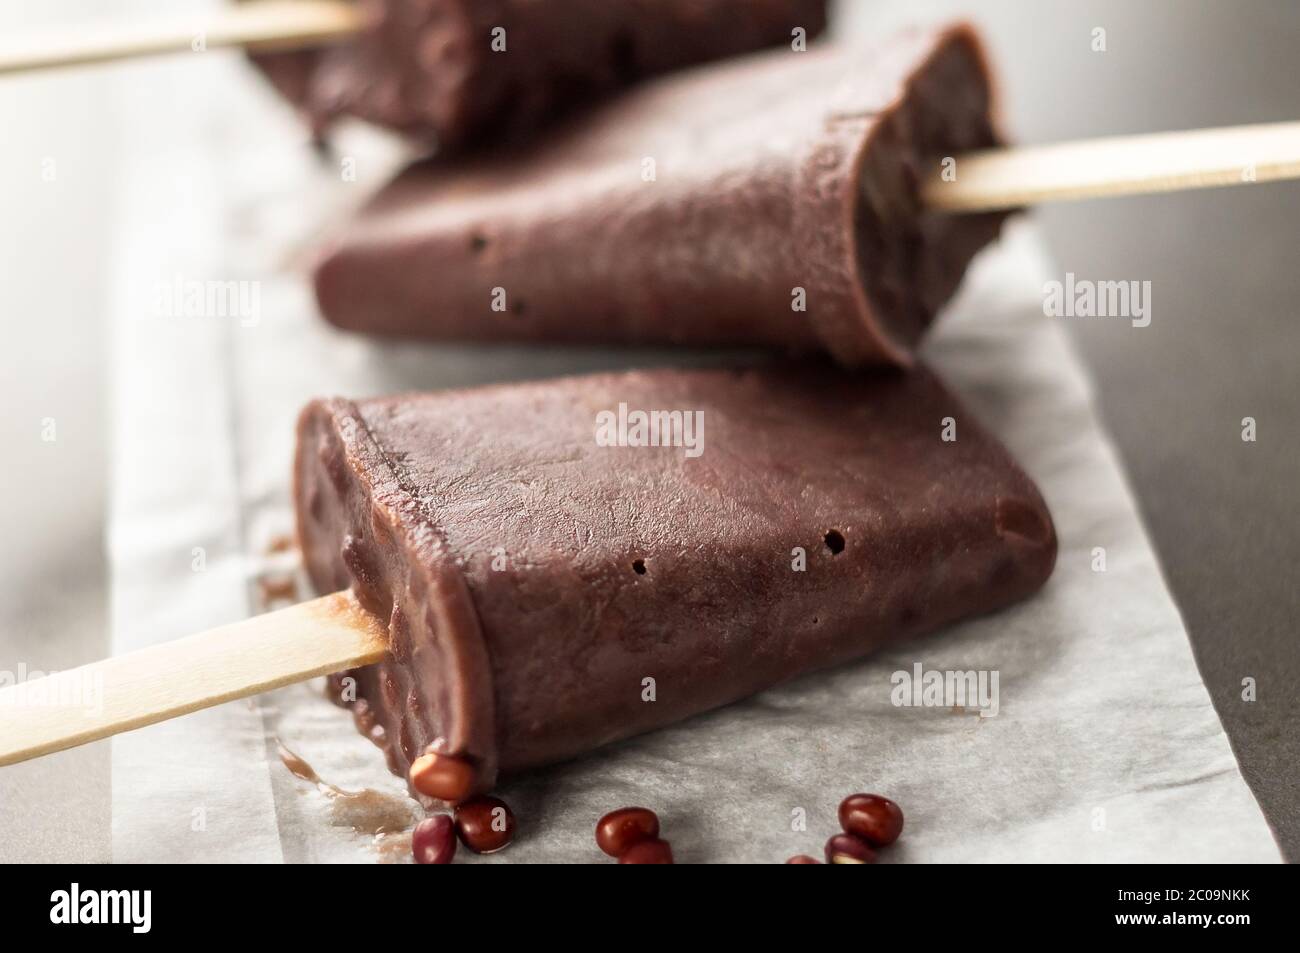 Sweet red bean popsicle closeup. Ice pops are a delicious way to cool off in hot summer days, these are made of red adzuki beans ice cream, a tiny Asi Stock Photo